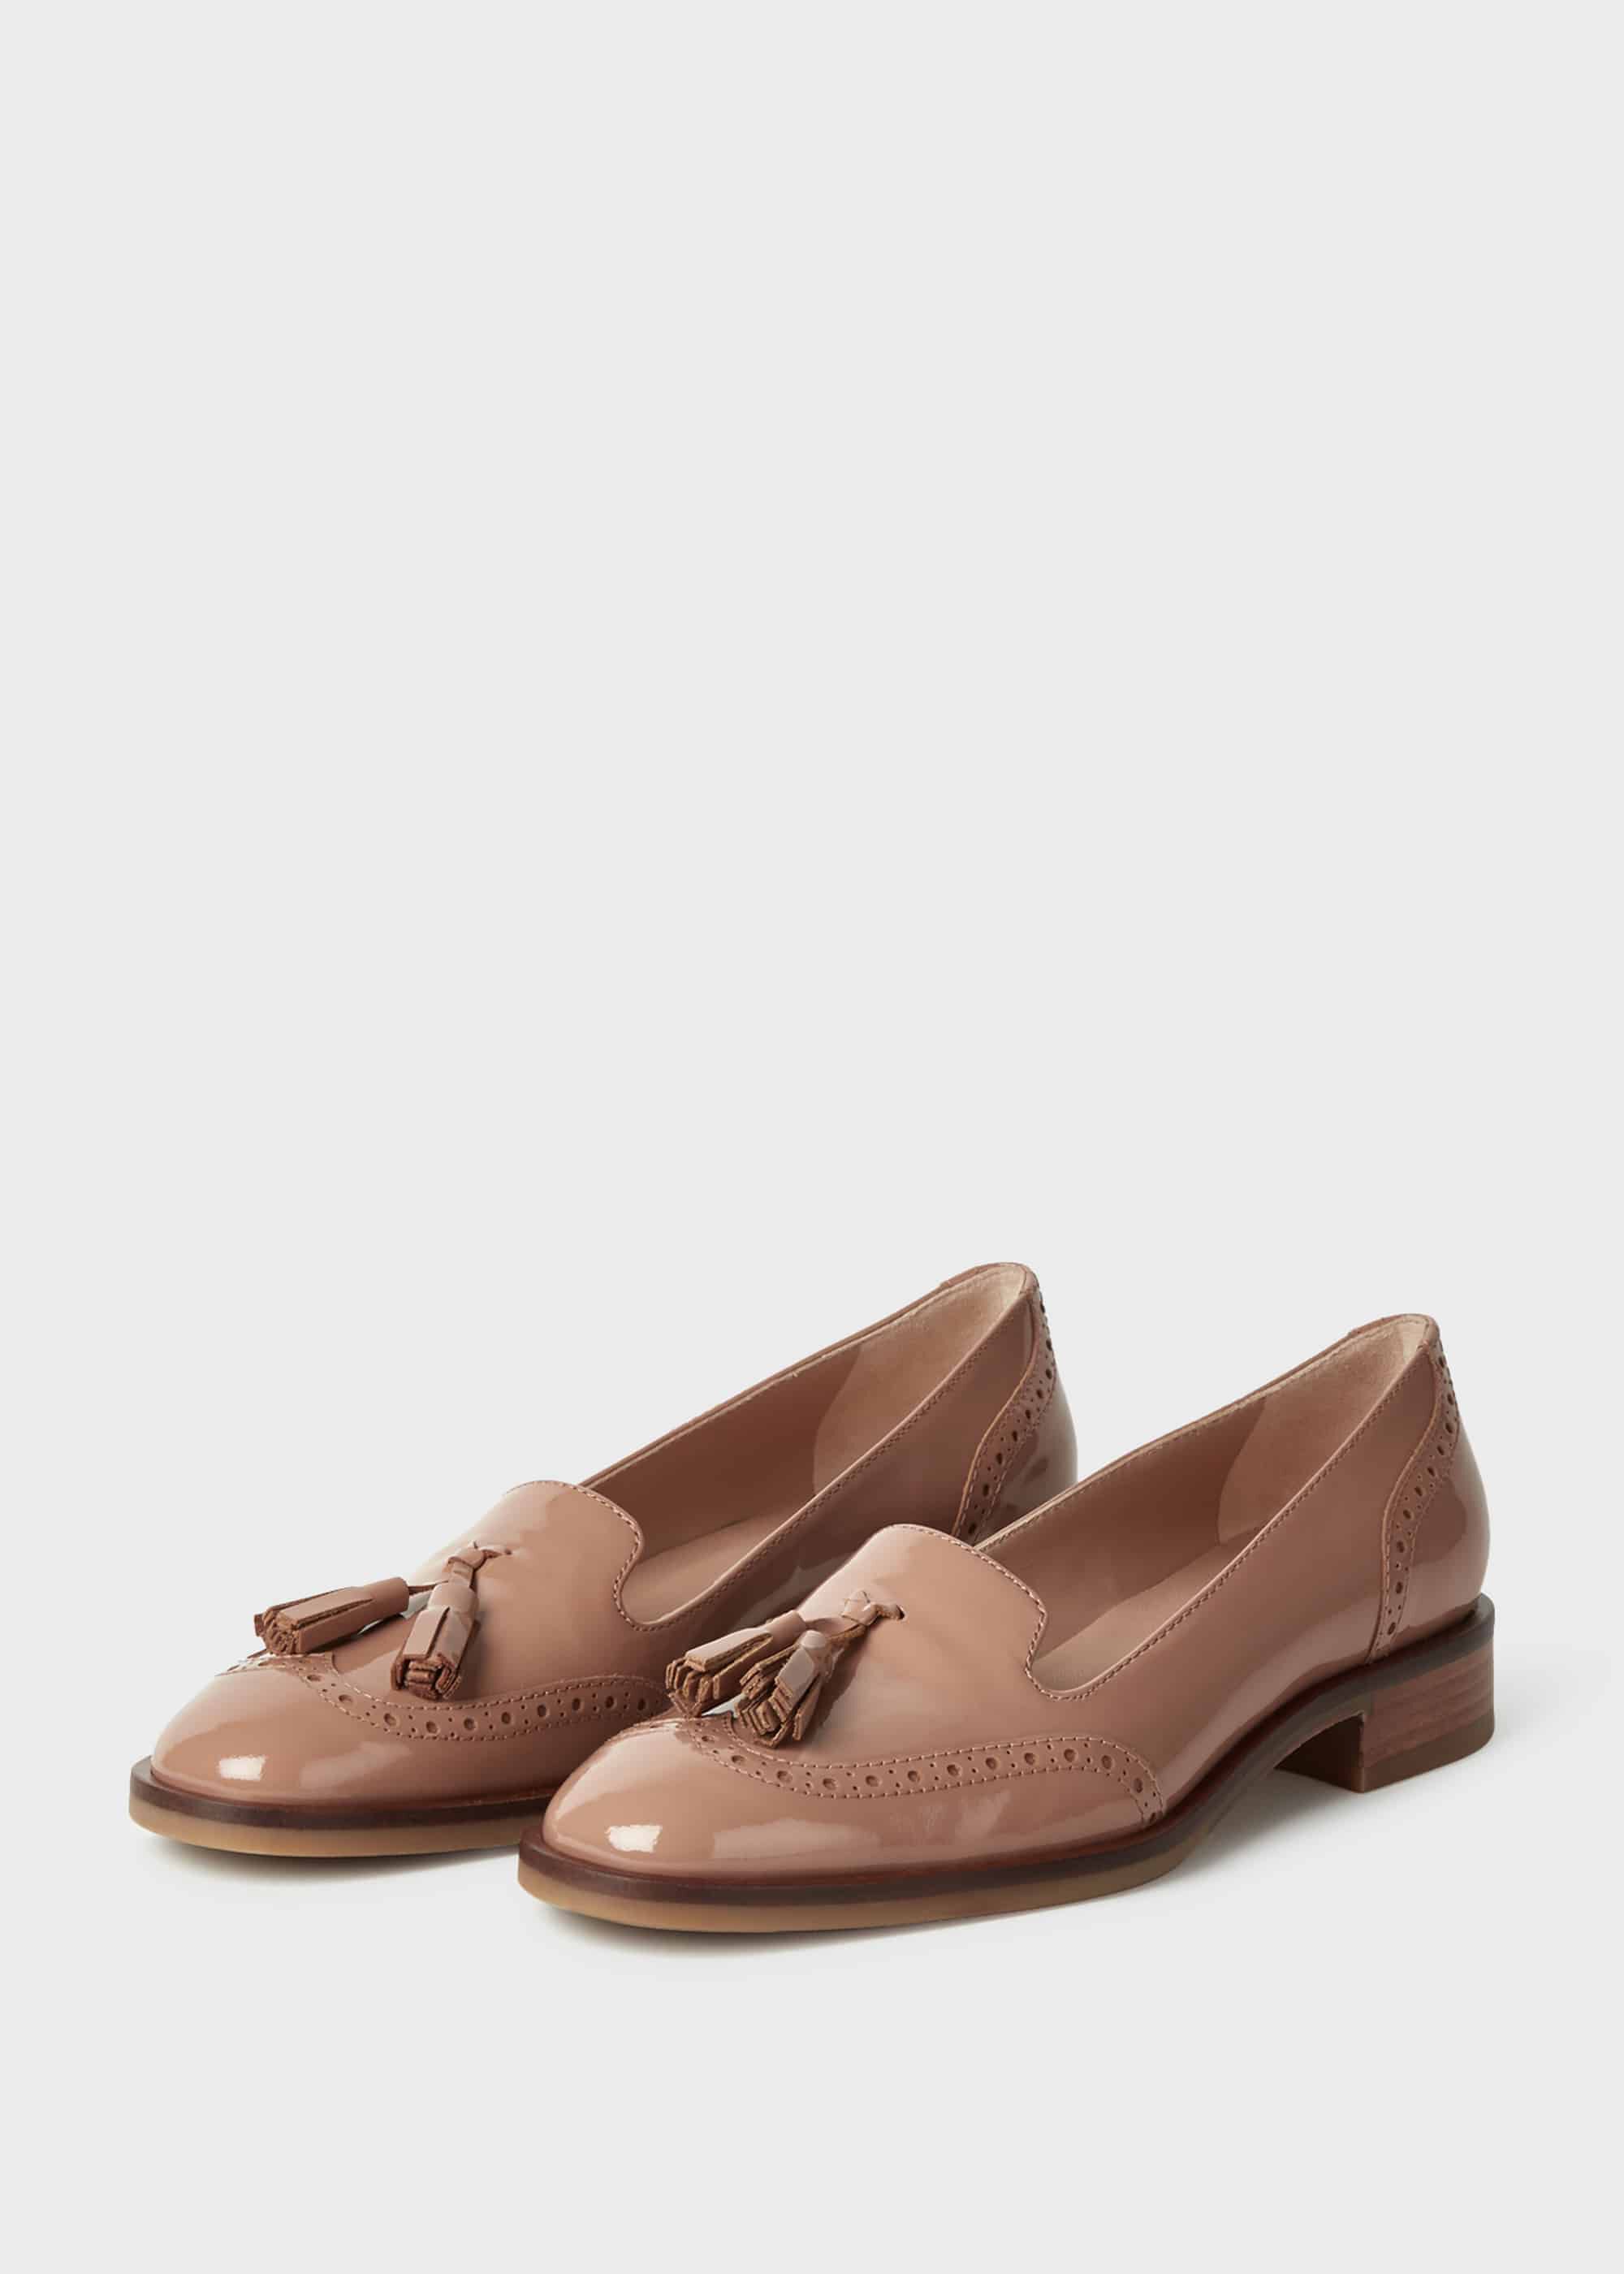 hobbs loafers